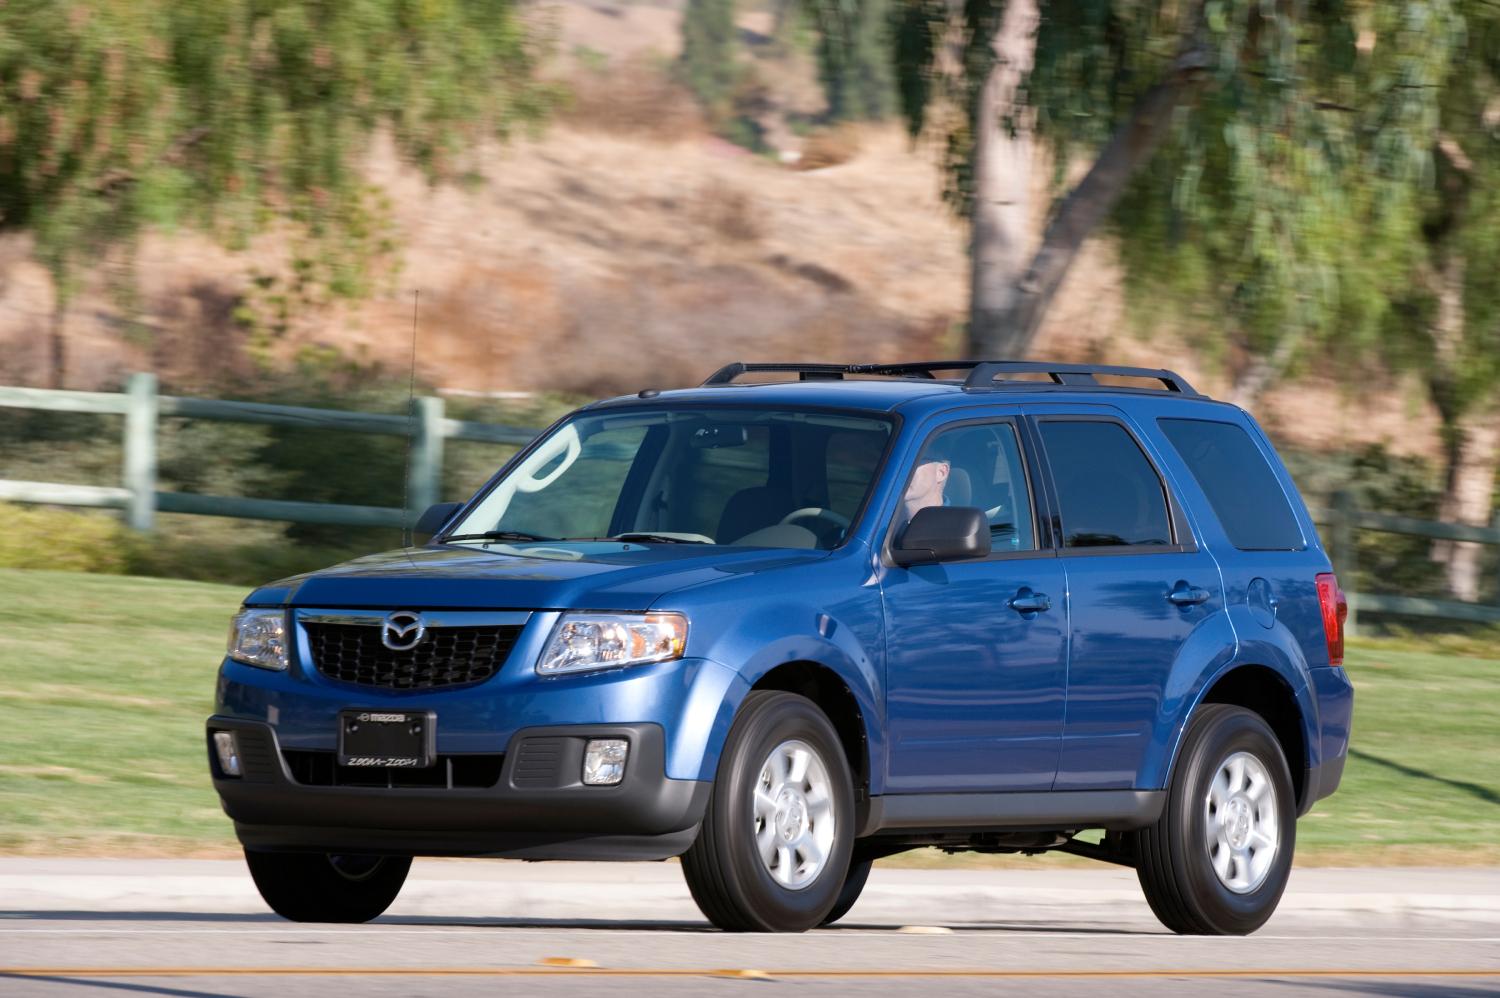 The Mazda Tribute has had some poor reliability scores, but doesn’t mean you should avoid the car.